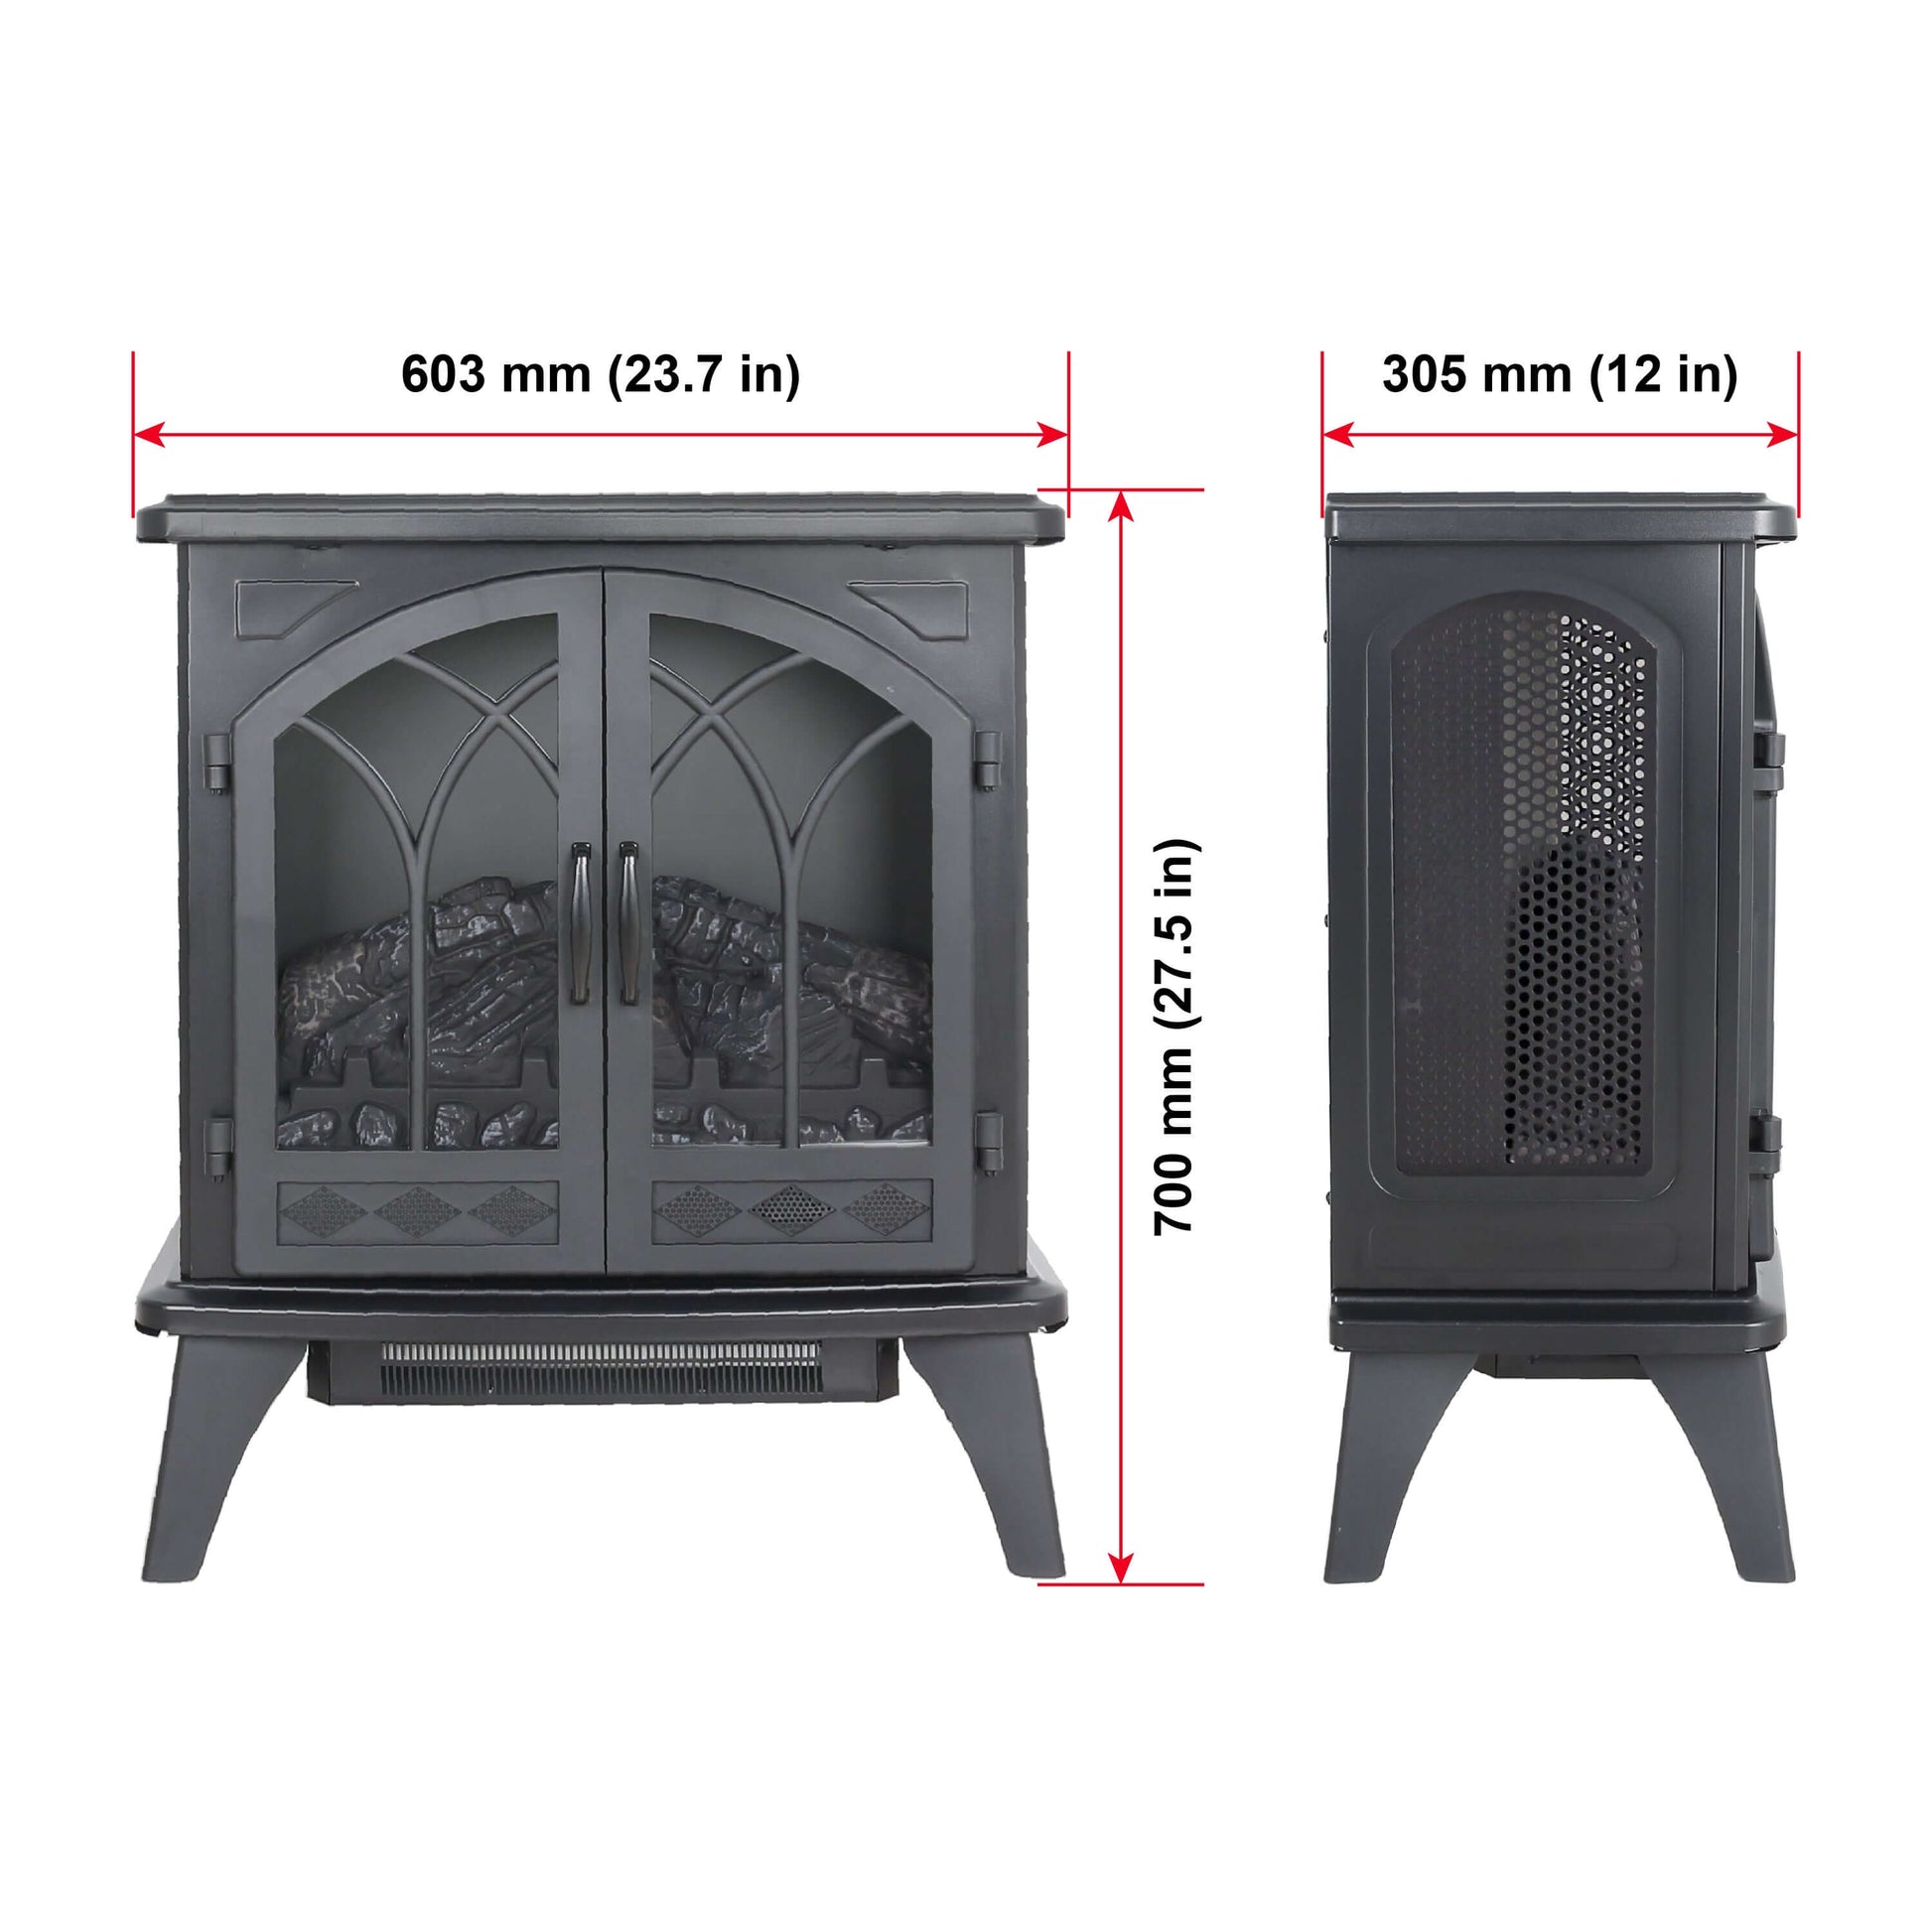 3D Infrared Electric Stove with Remote - Portable